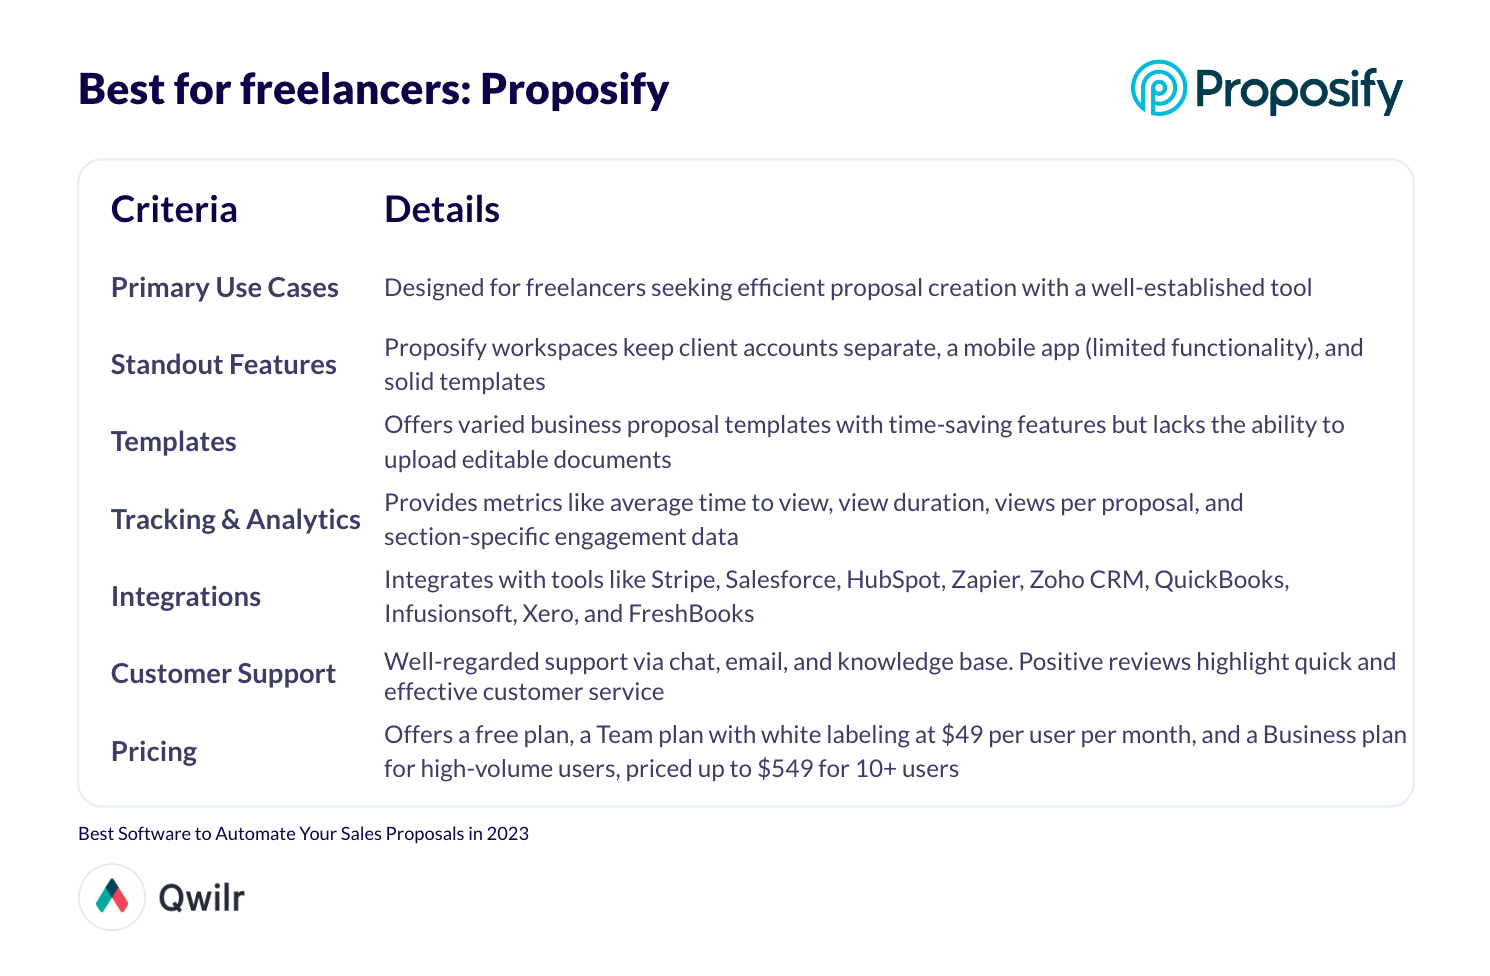 Table summary: Best for freelancers: Proposify